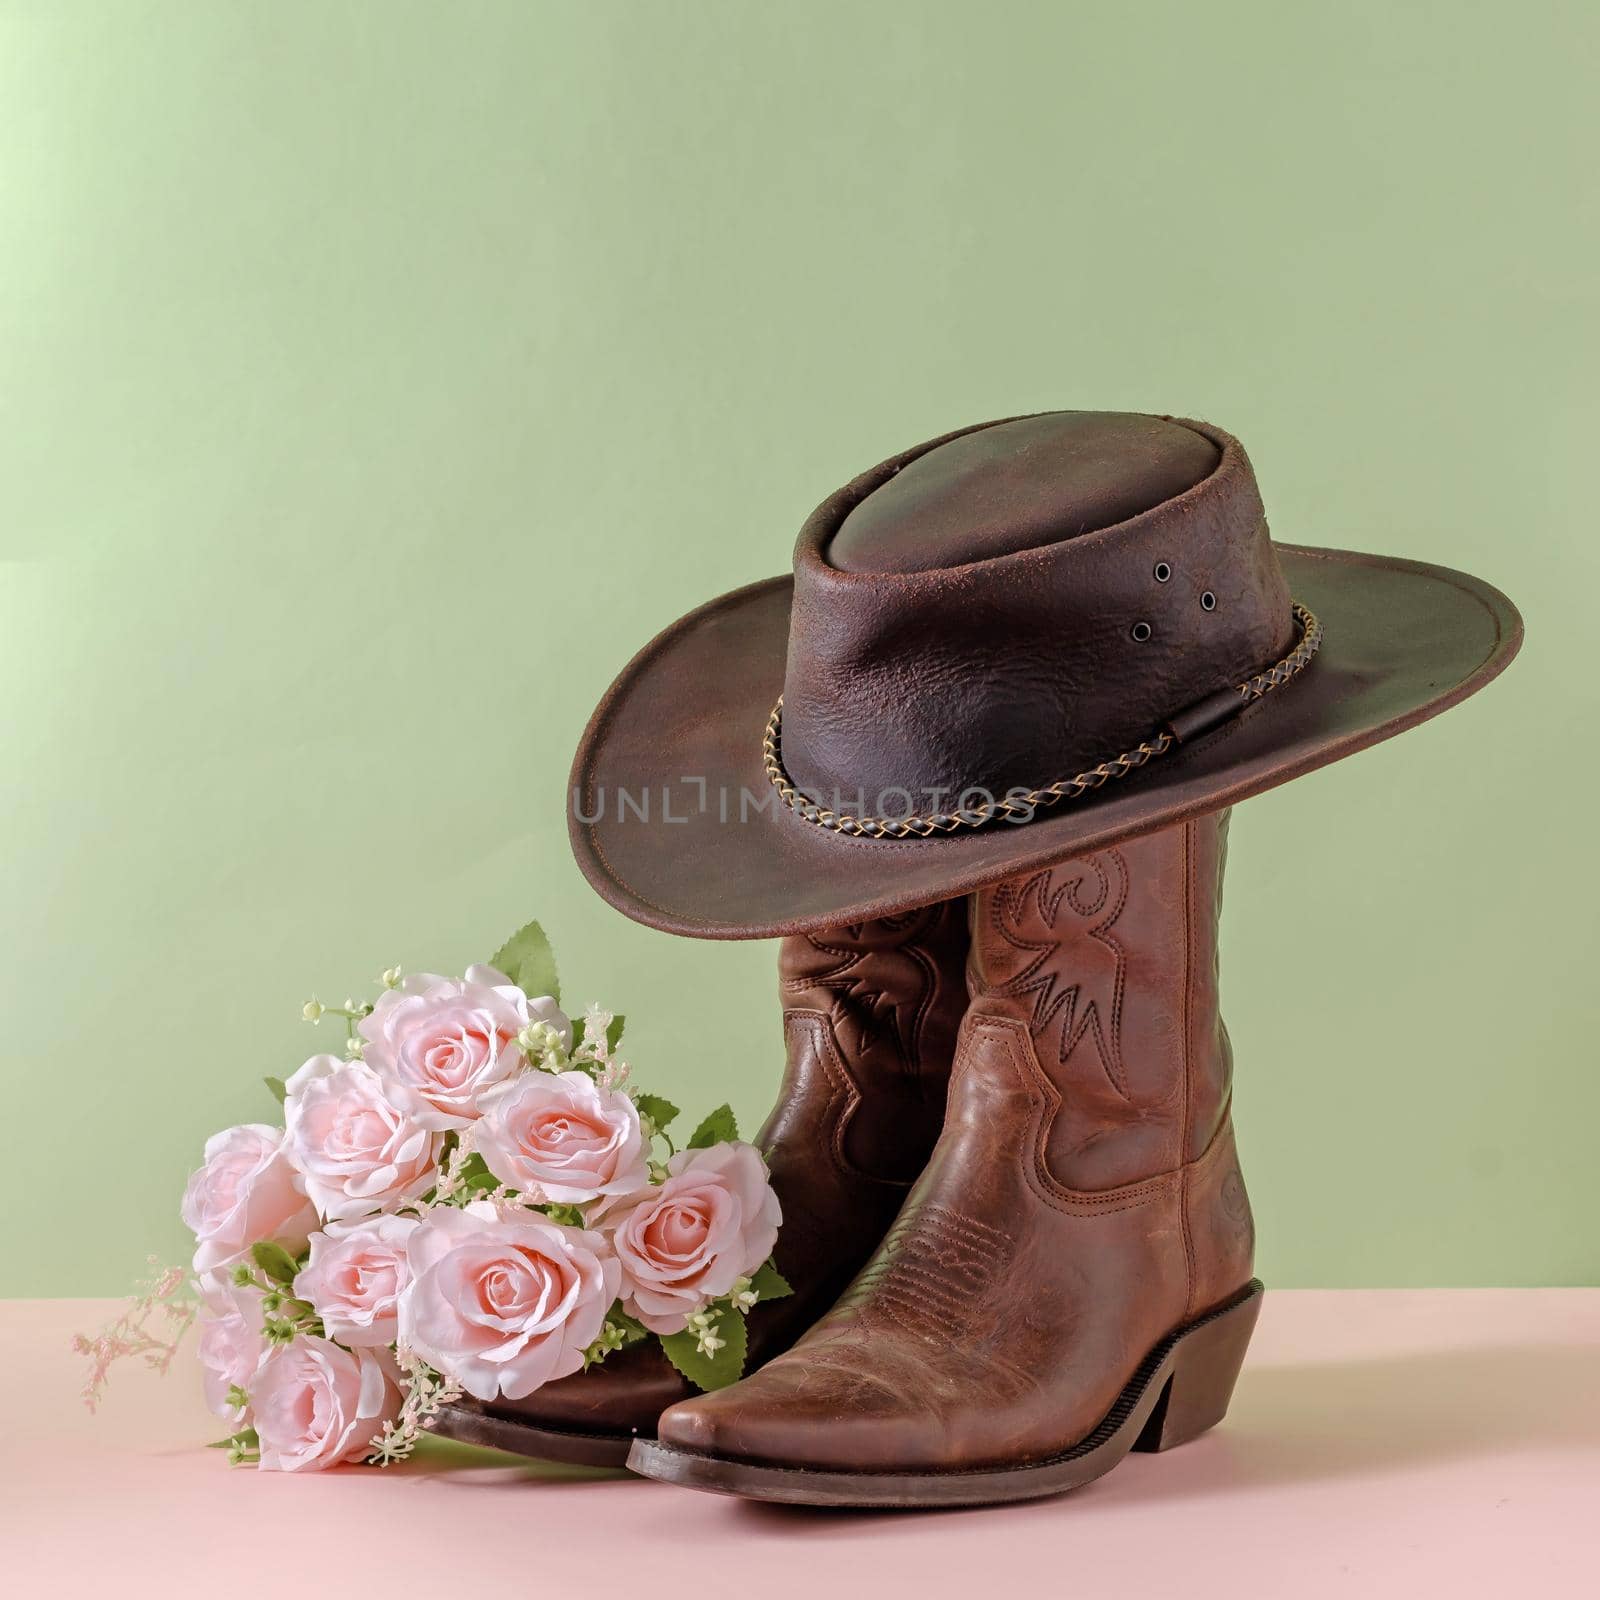 Cowboy boots shoes and hat and bouquet of rose flowers on green background by sergii_gnatiuk